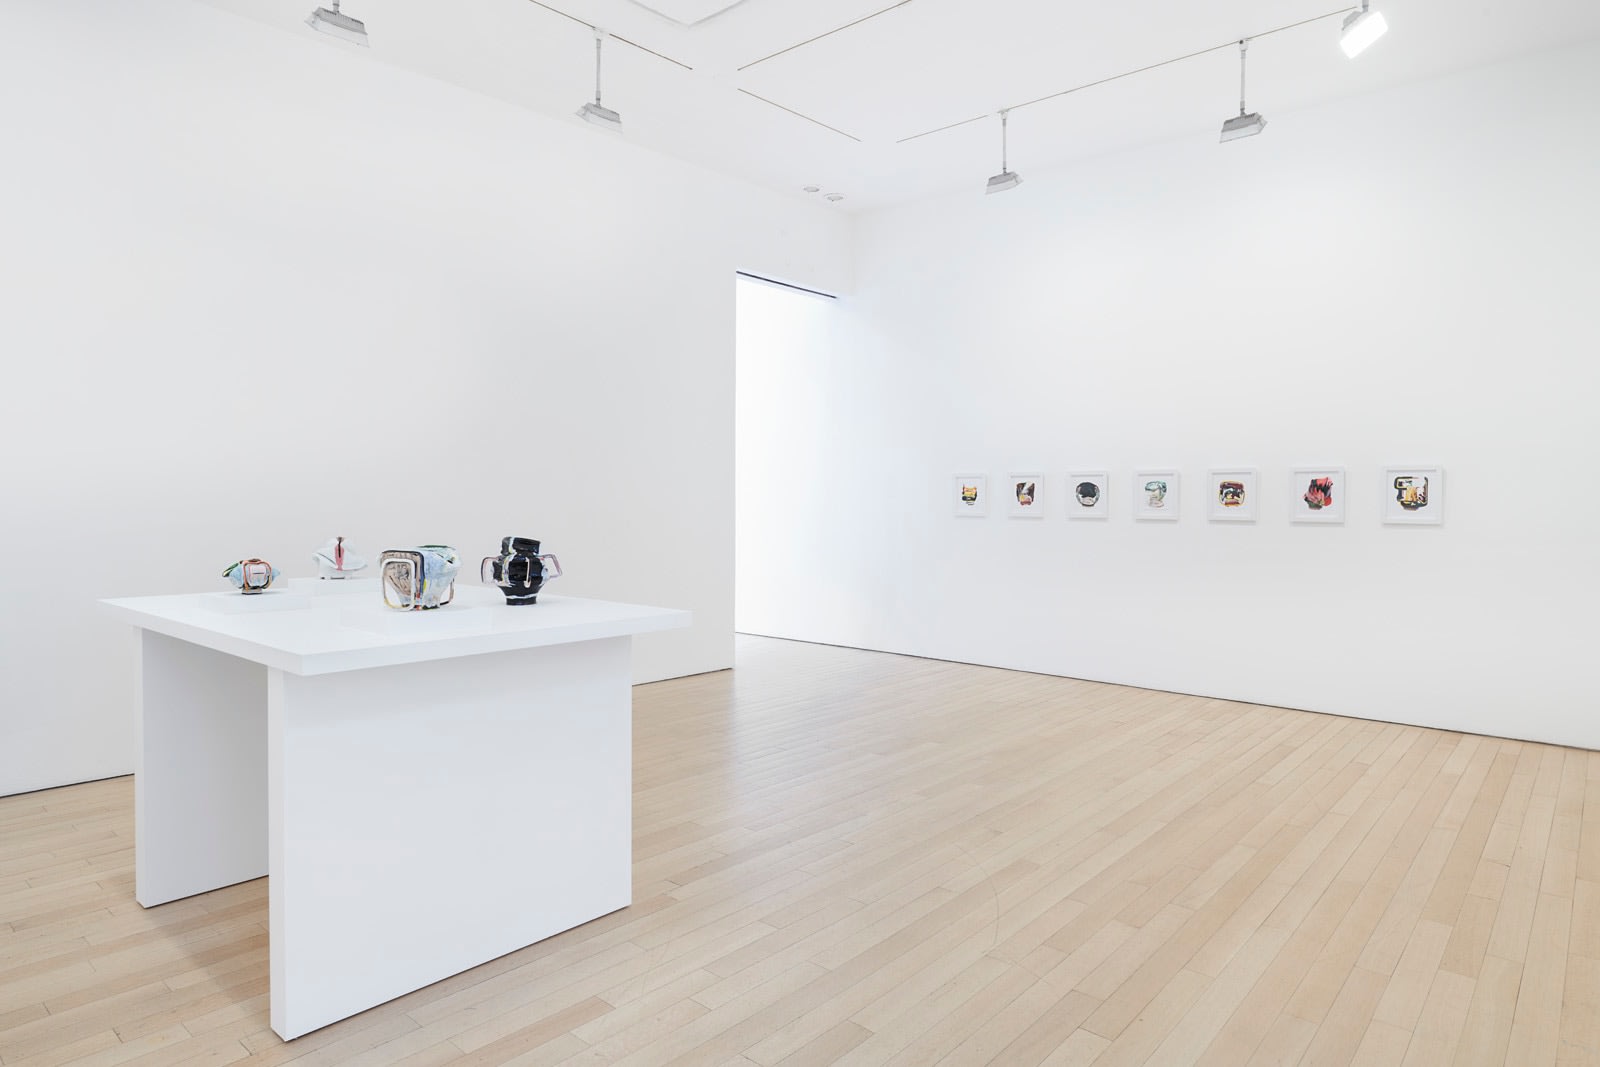 installation view of gallery exhibition